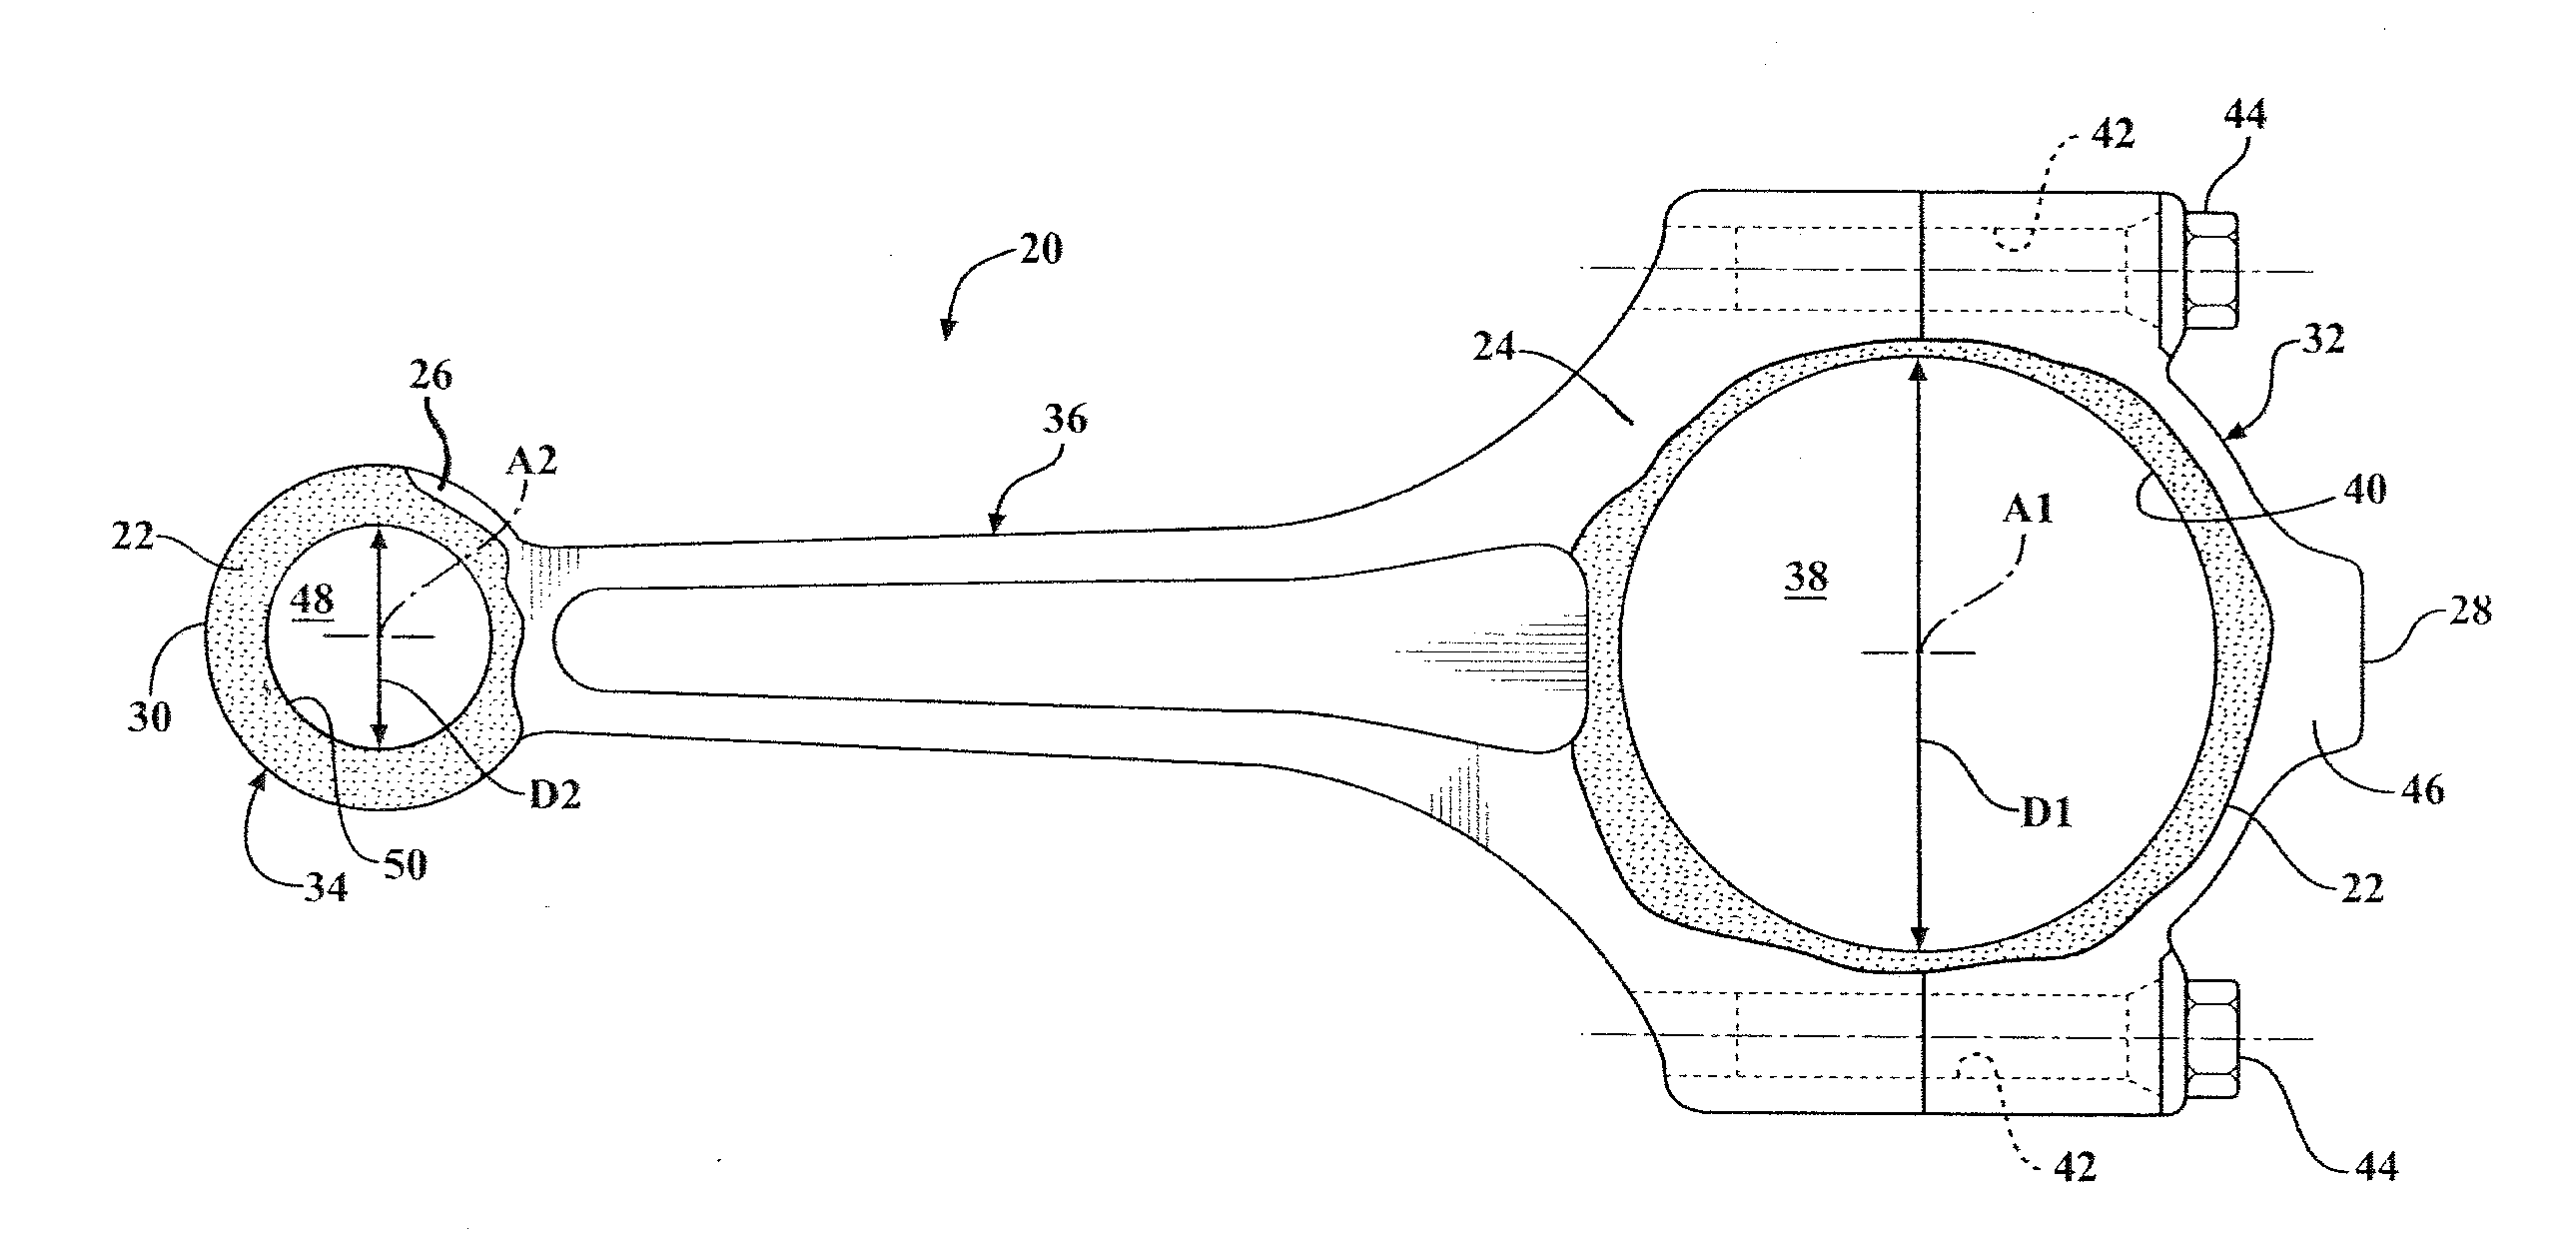 Applying polymer coating connecting rod surfaces for reduced wear